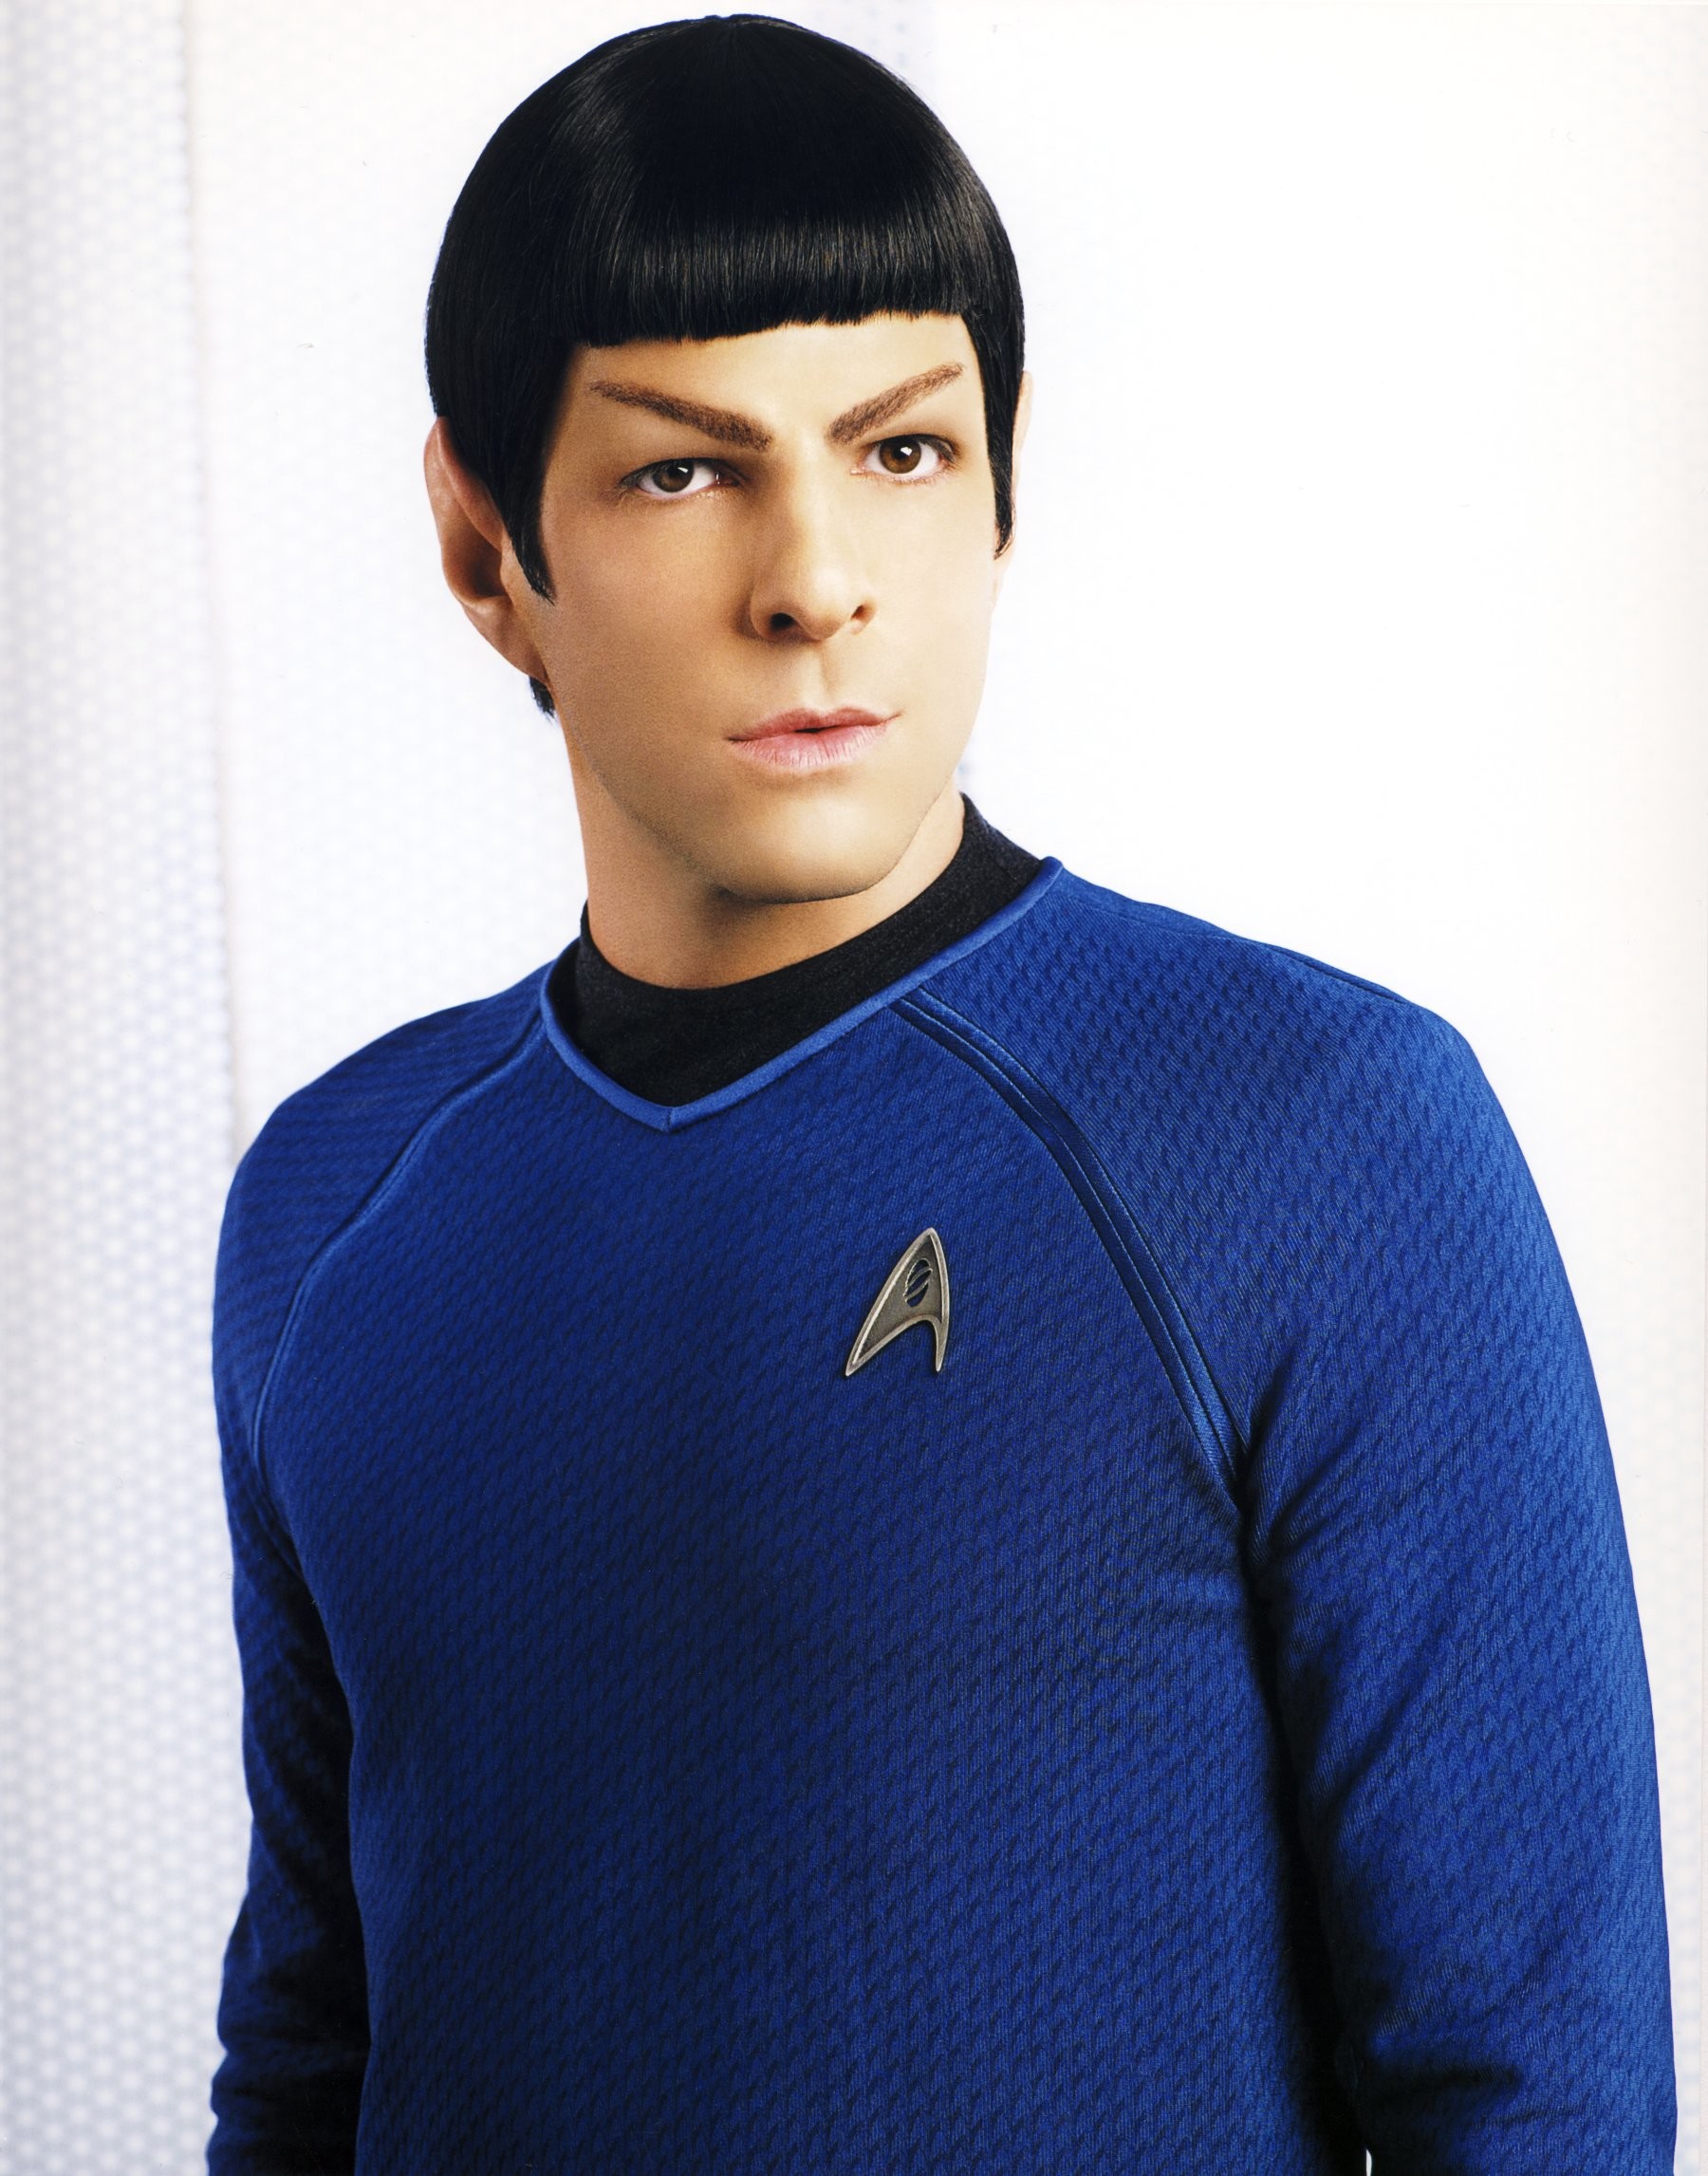 1800x2293 HD Wallpaper and background photos of Sock Zachary Quinto for fans of  Zachary Quinto's Spock images.